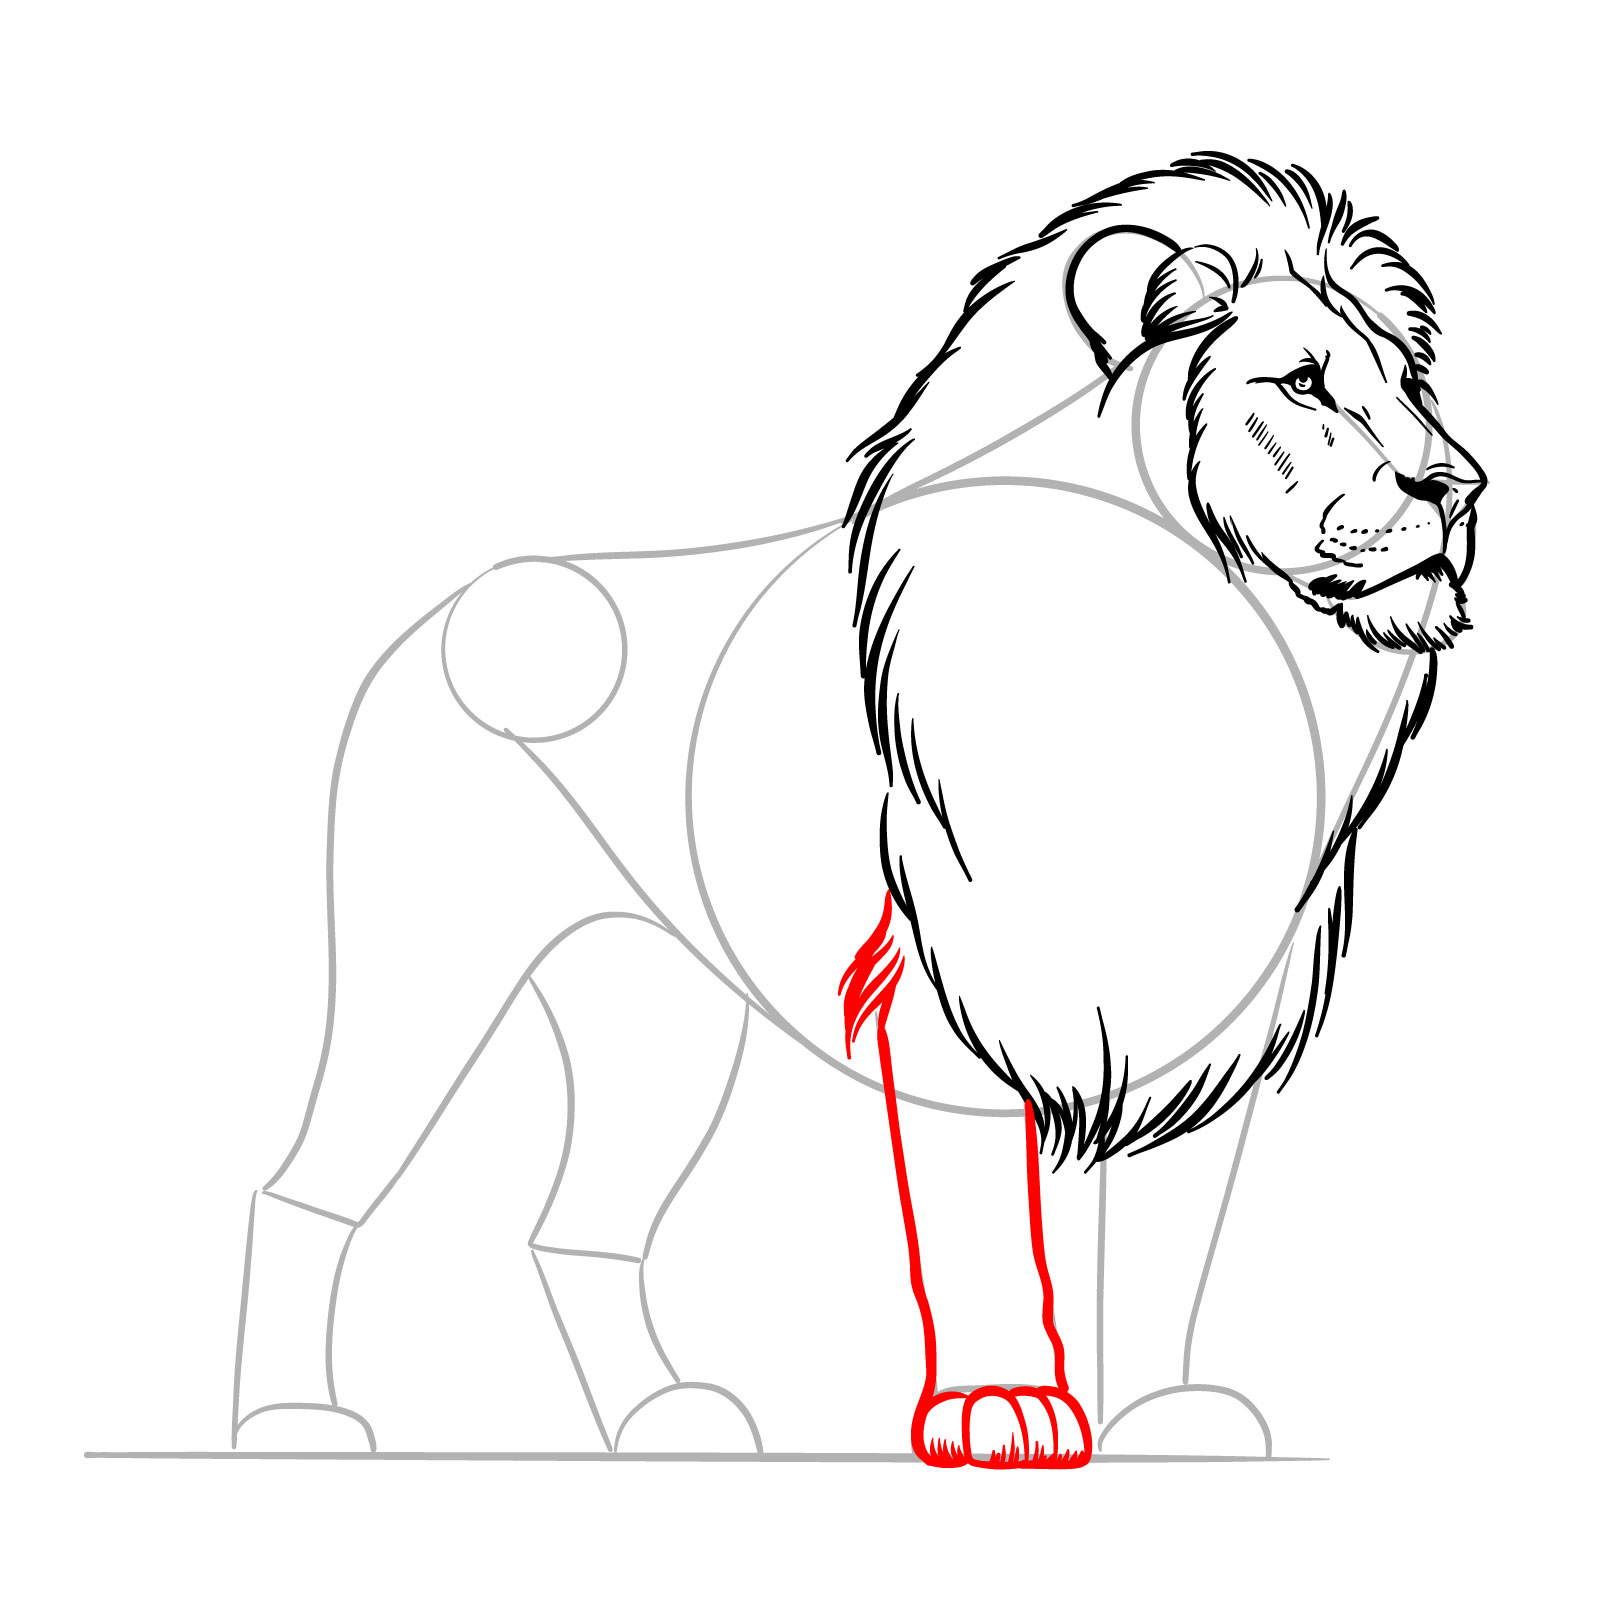 Drawing the front right leg of a lion in a how-to guide - step 09